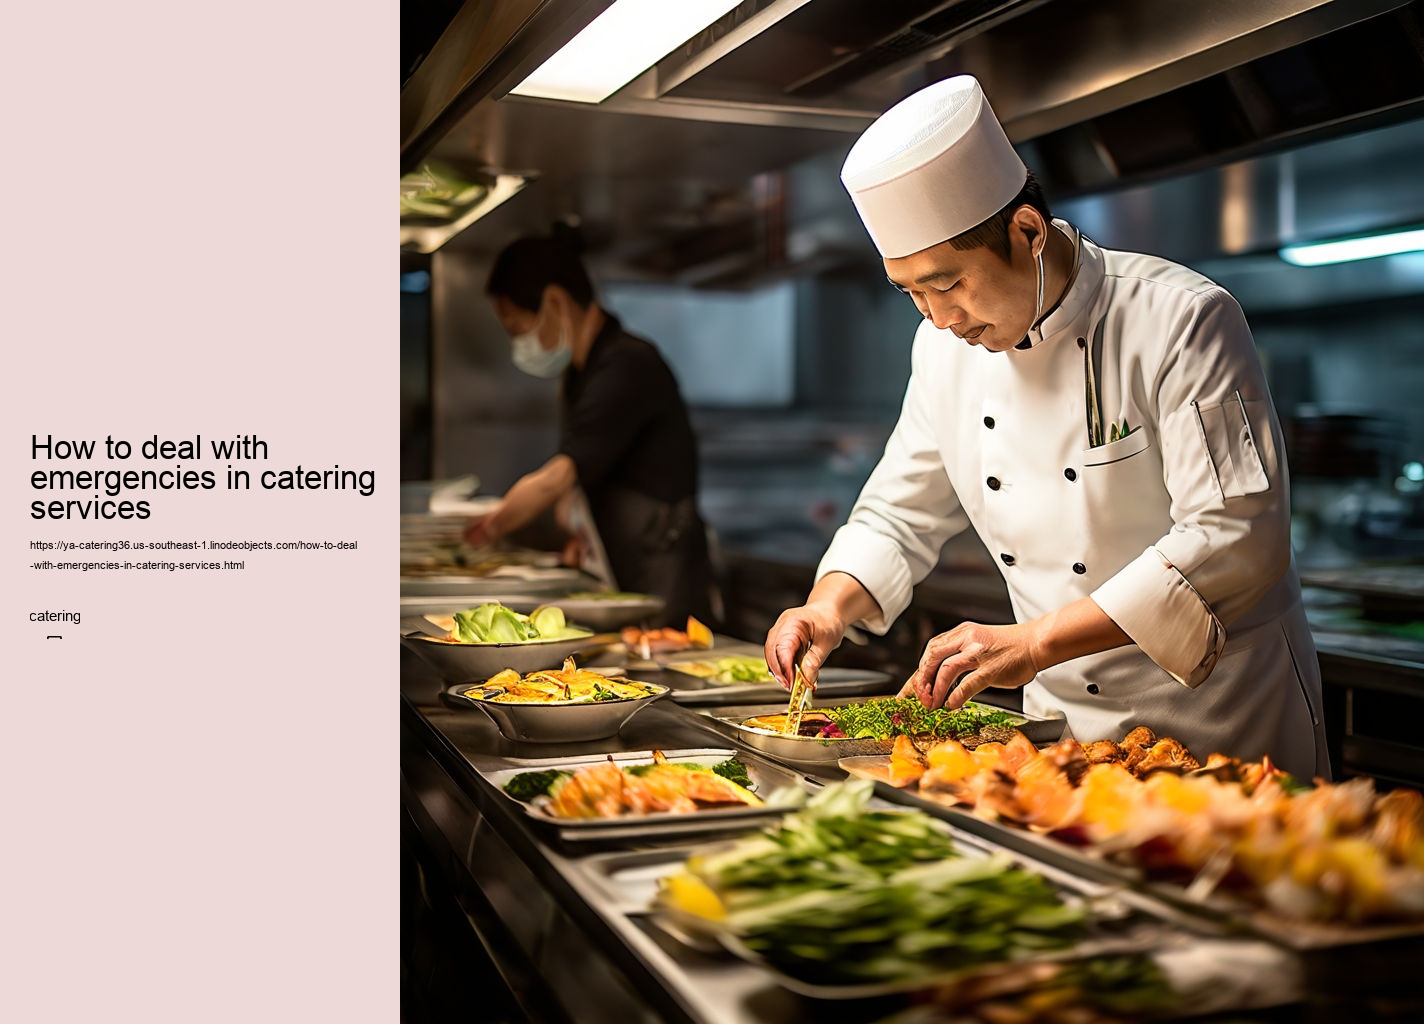 How to deal with emergencies in catering services